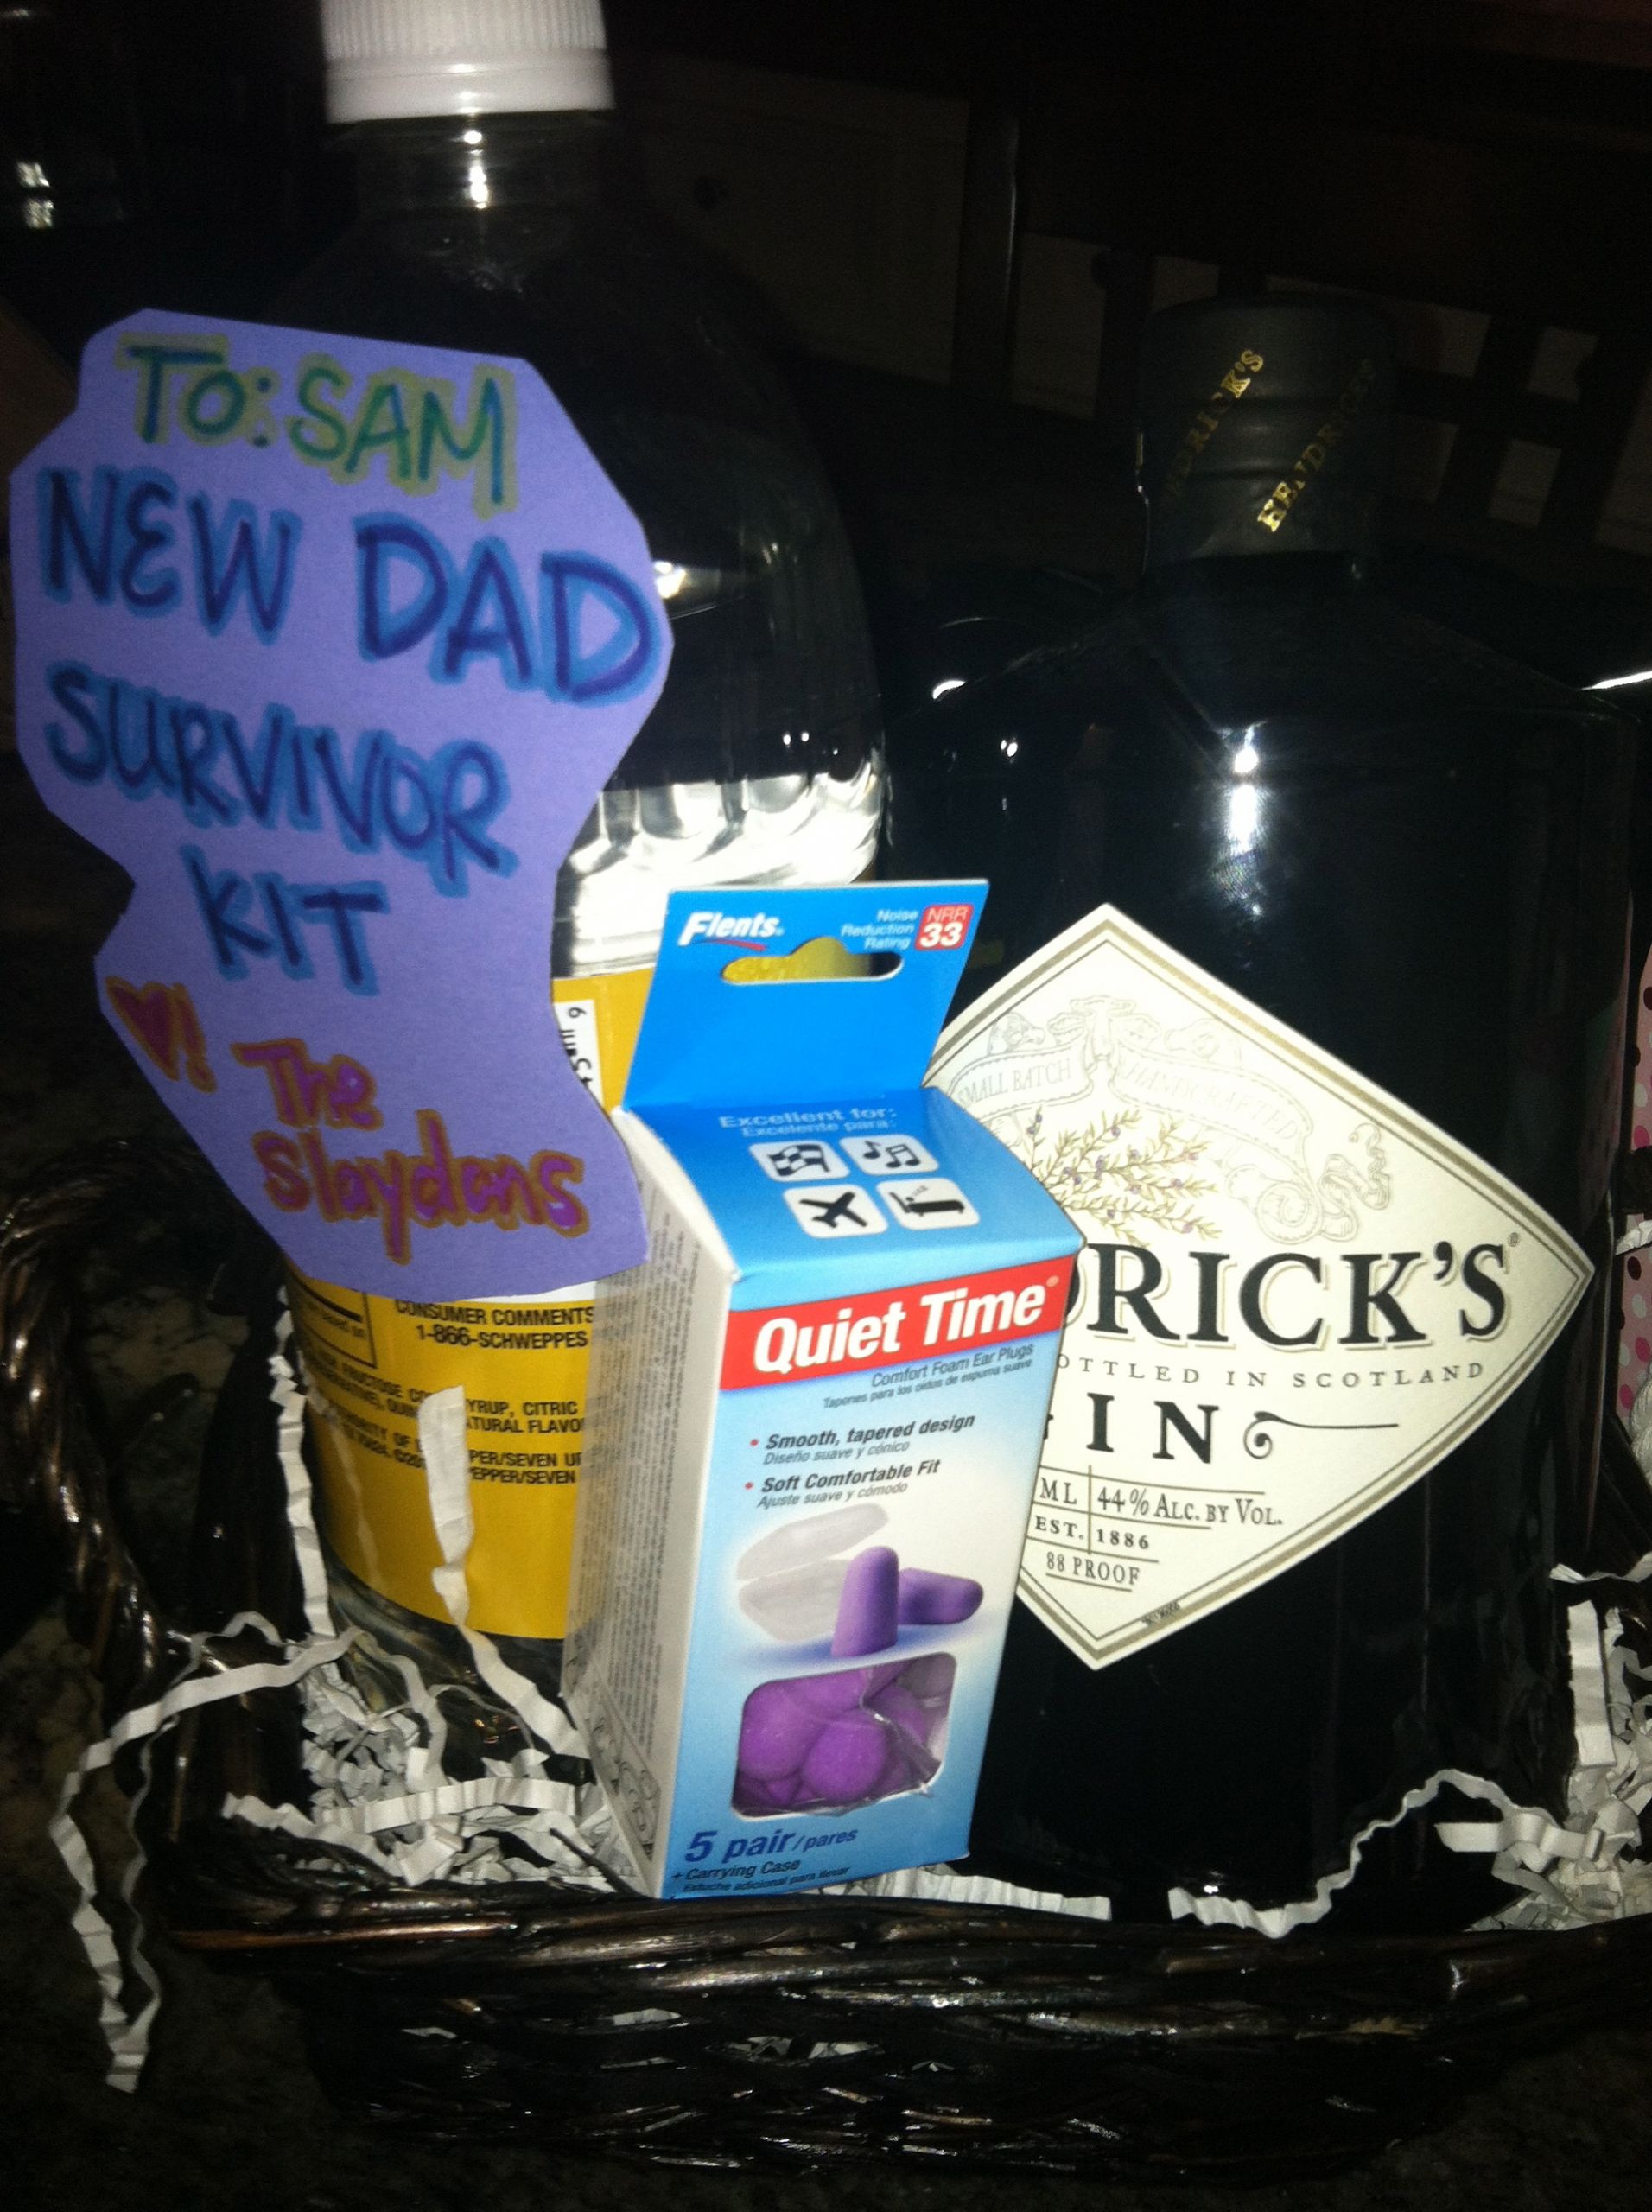 Baby Shower Gift Ideas For Dads
 Don’t for the dad Cute easy baby shower t idea